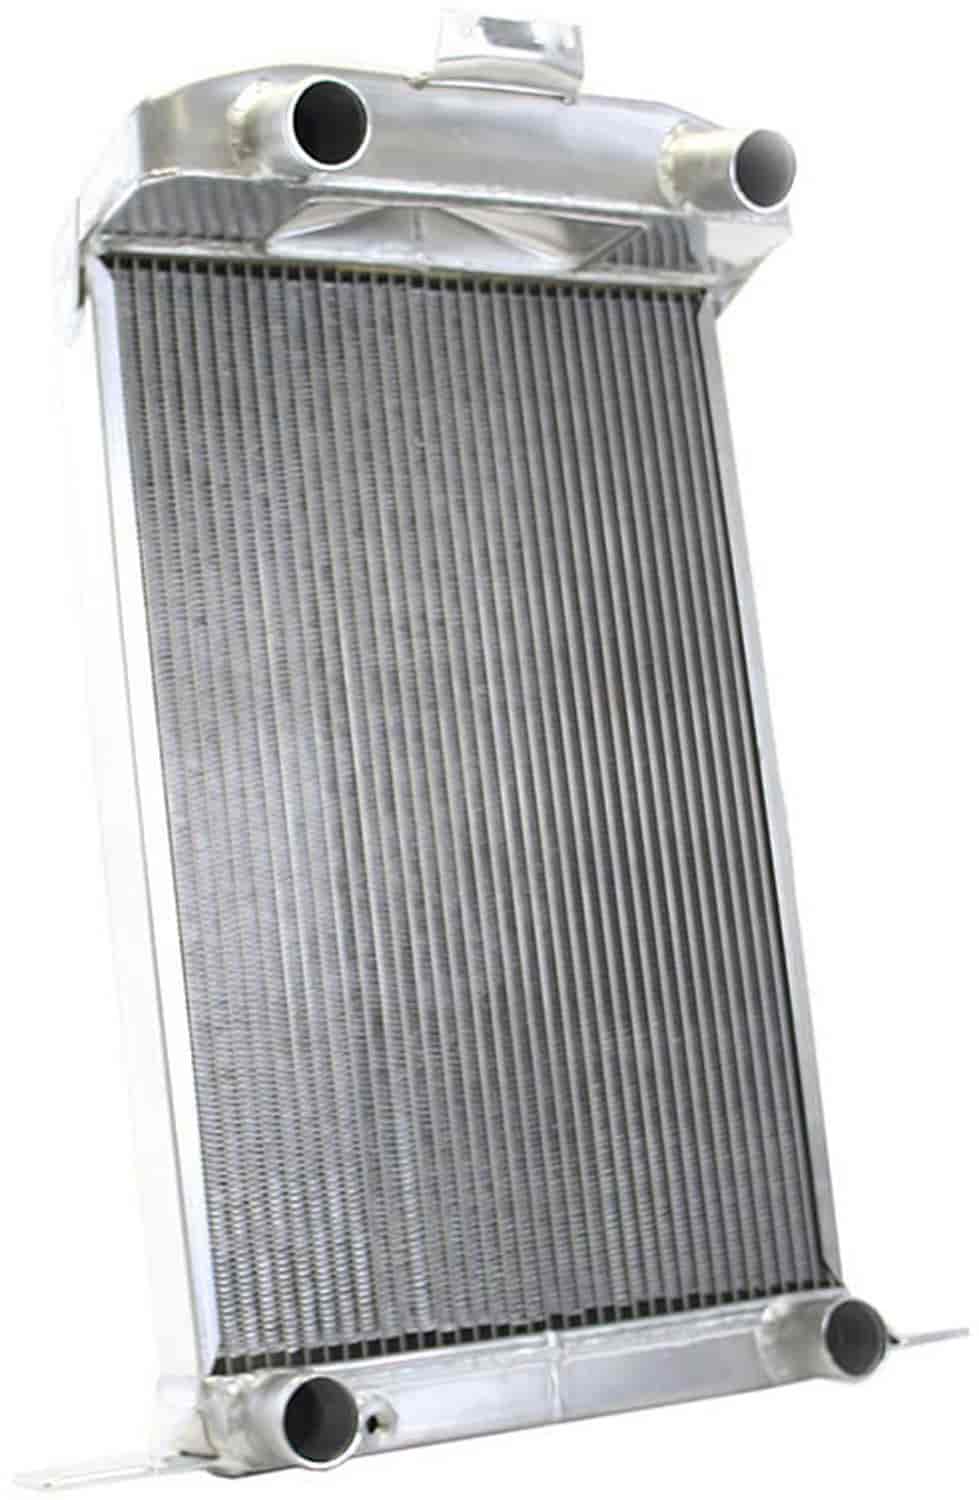 ExactFit Radiator for 1937-1938 Ford with Early Ford Flathead V8